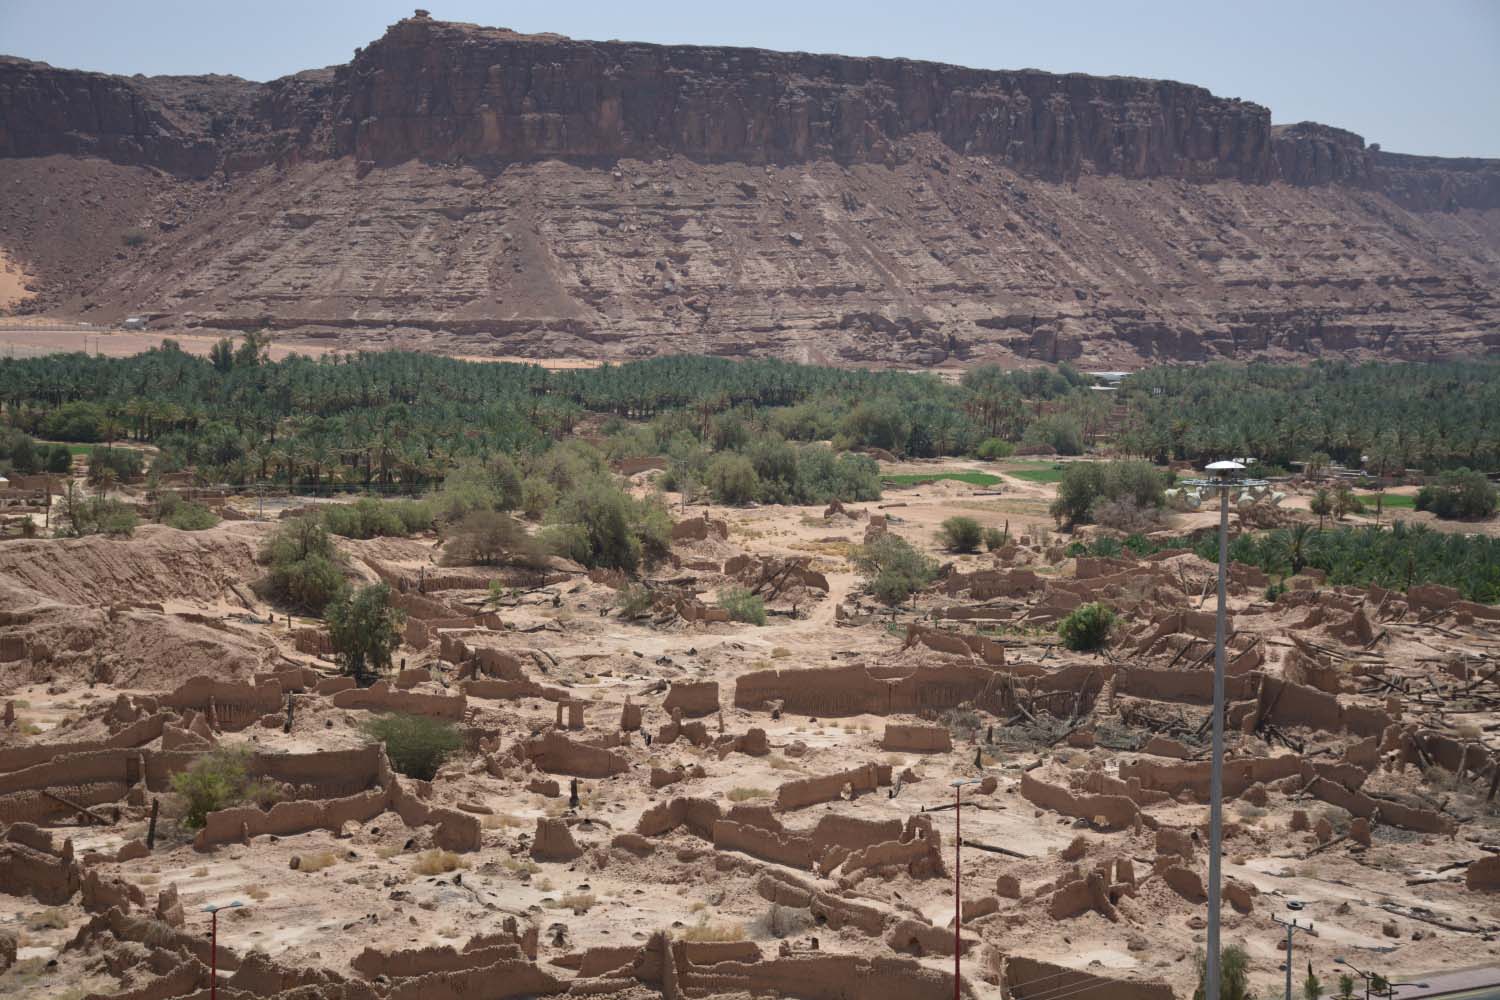 al-Ula - Elevated view of the town toward a plateau